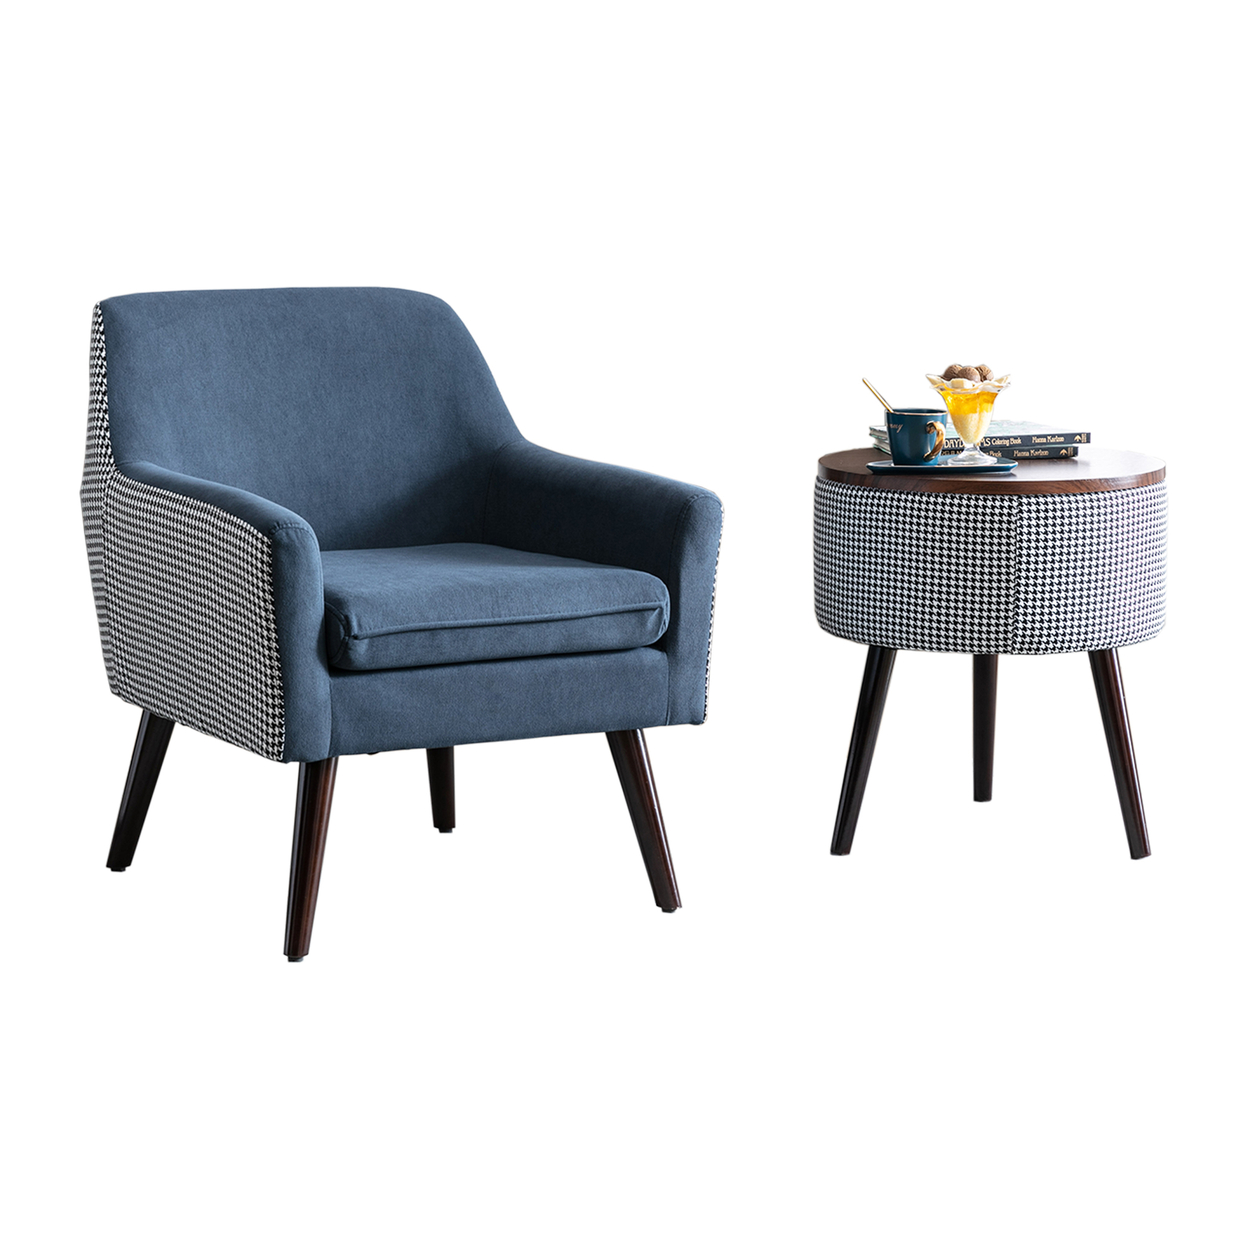 2 Piece Accent Chair And Side Storage Table Set, Splayed Legs, Deep Blue- Saltoro Sherpi